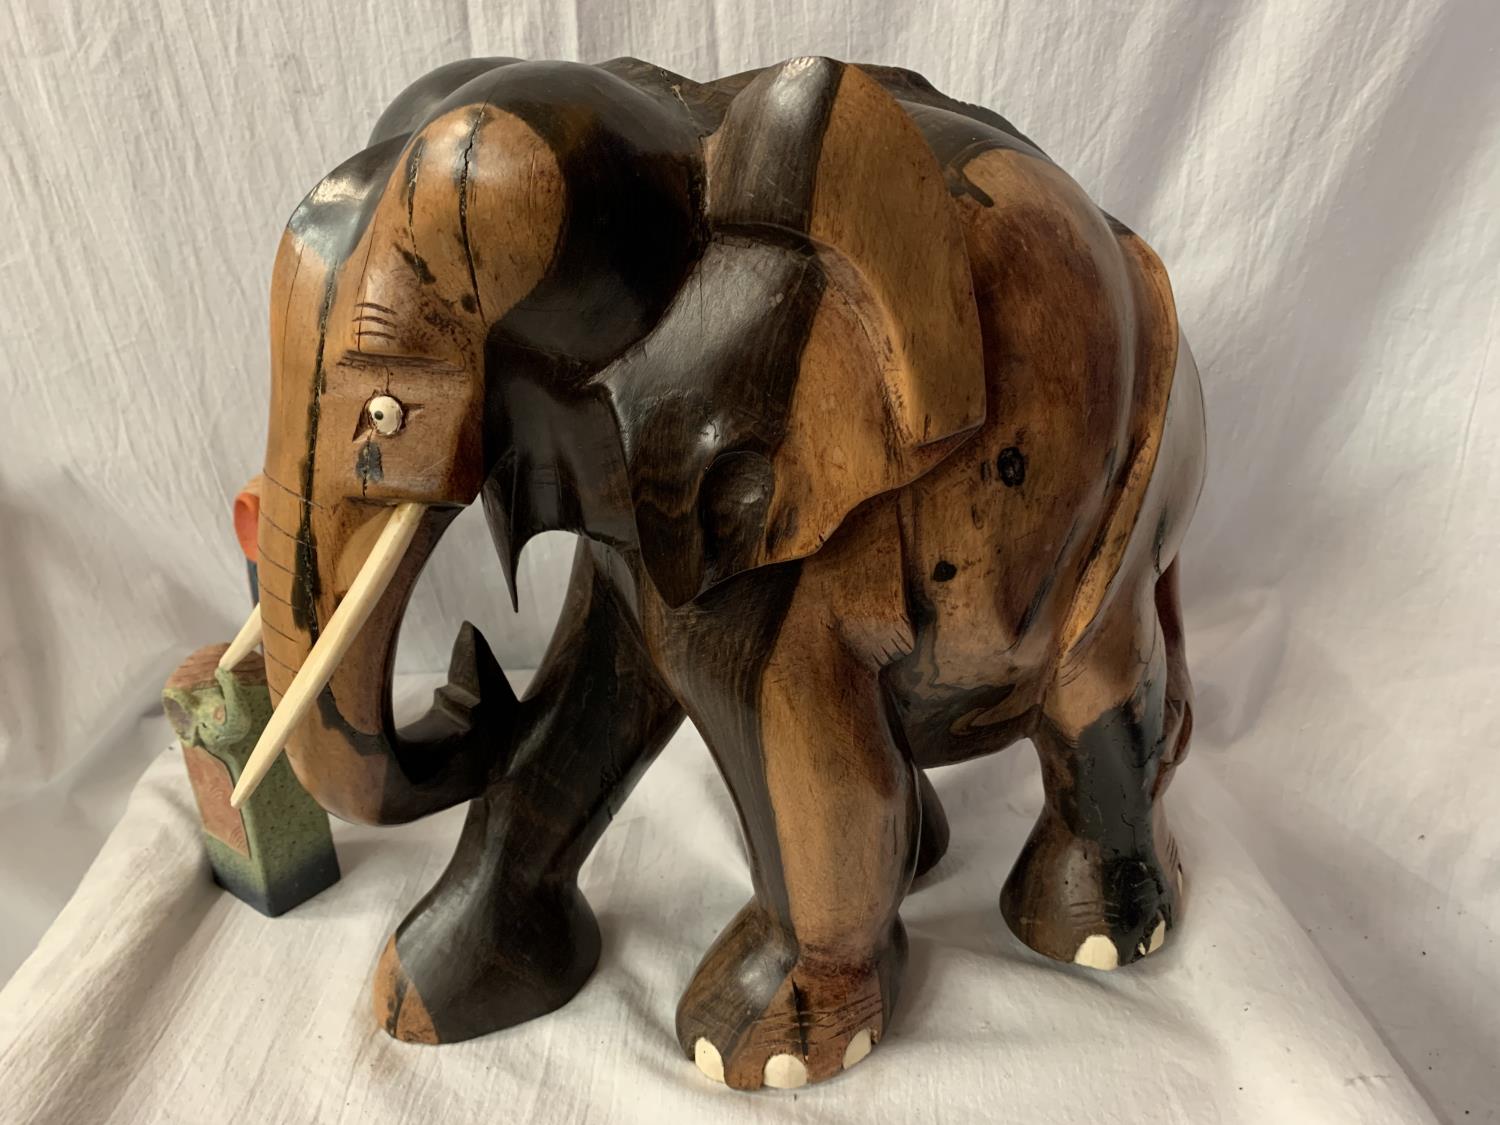 A LARGE CARVED HEAVY HARD WOOD ELEPHANT (H: APPROX. 30CM) AND TWO CERAMIC ELEPHANT ITEMS - Image 2 of 5